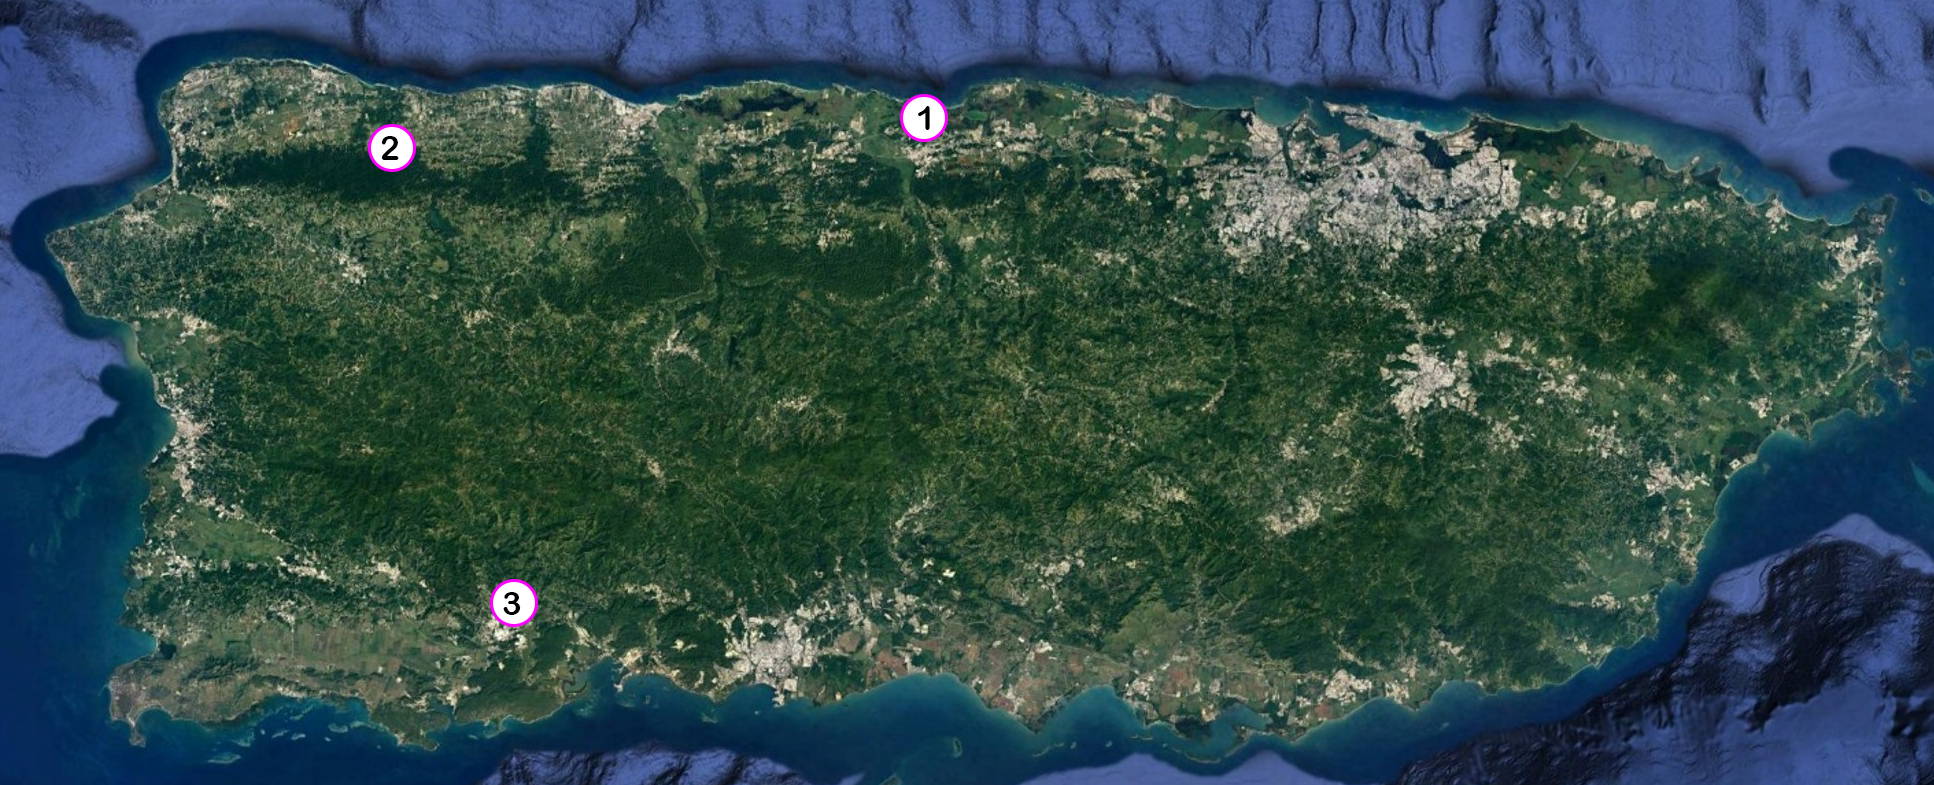 Map of Puerto Rico with numbered location of projects